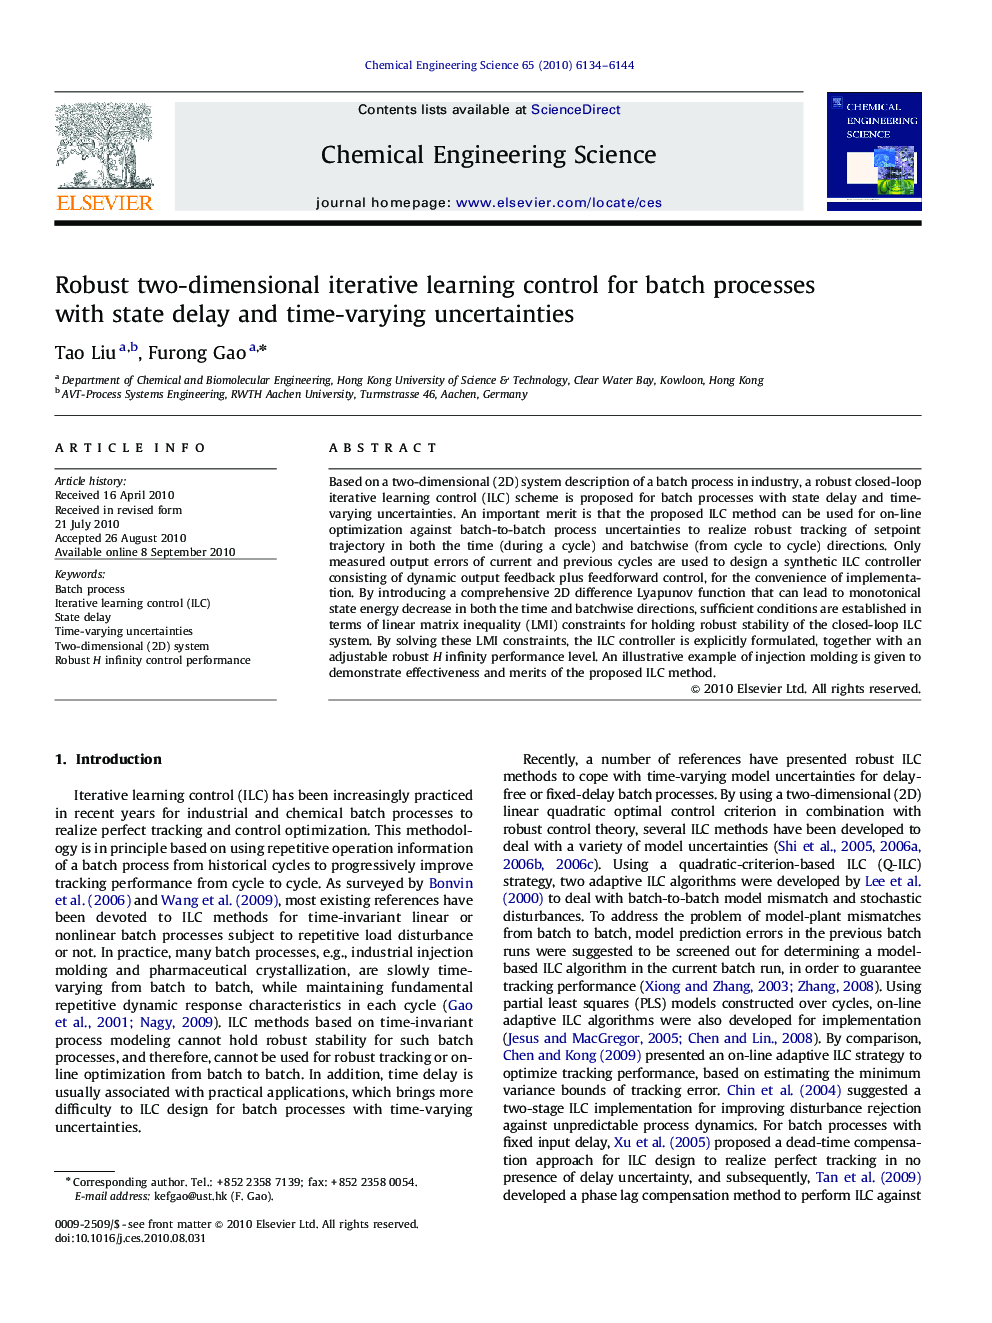 Robust two-dimensional iterative learning control for batch processes with state delay and time-varying uncertainties